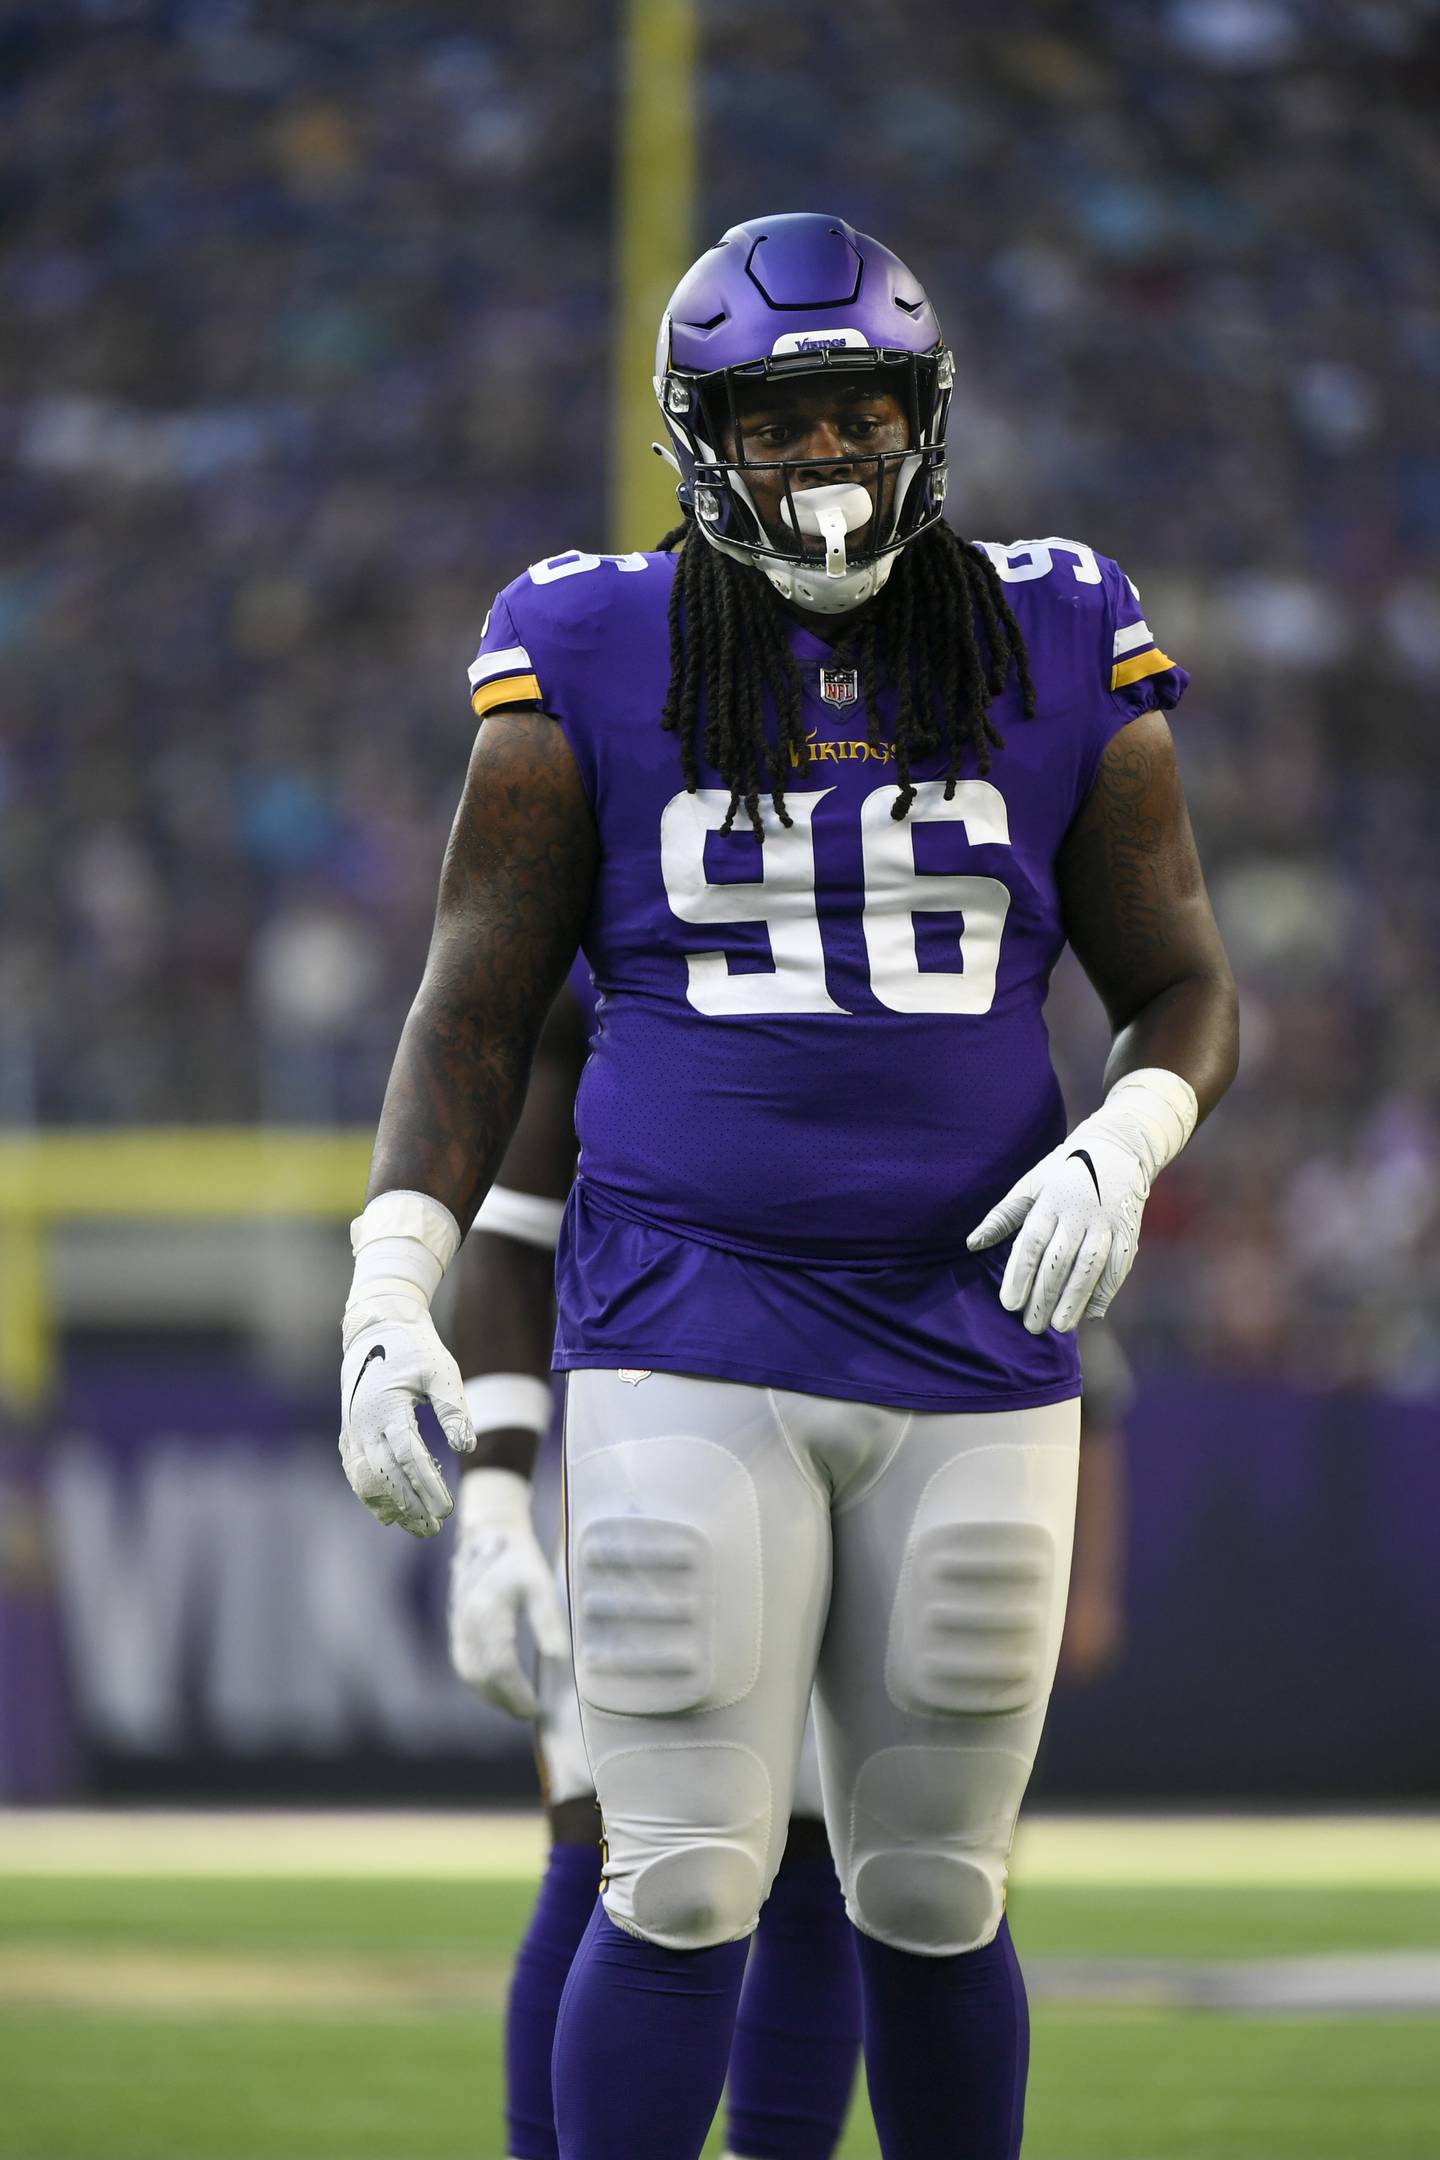 Vikings defensive lineman Armon Watts in action against the 49ers during a preseason game on Aug. 20, 2022.